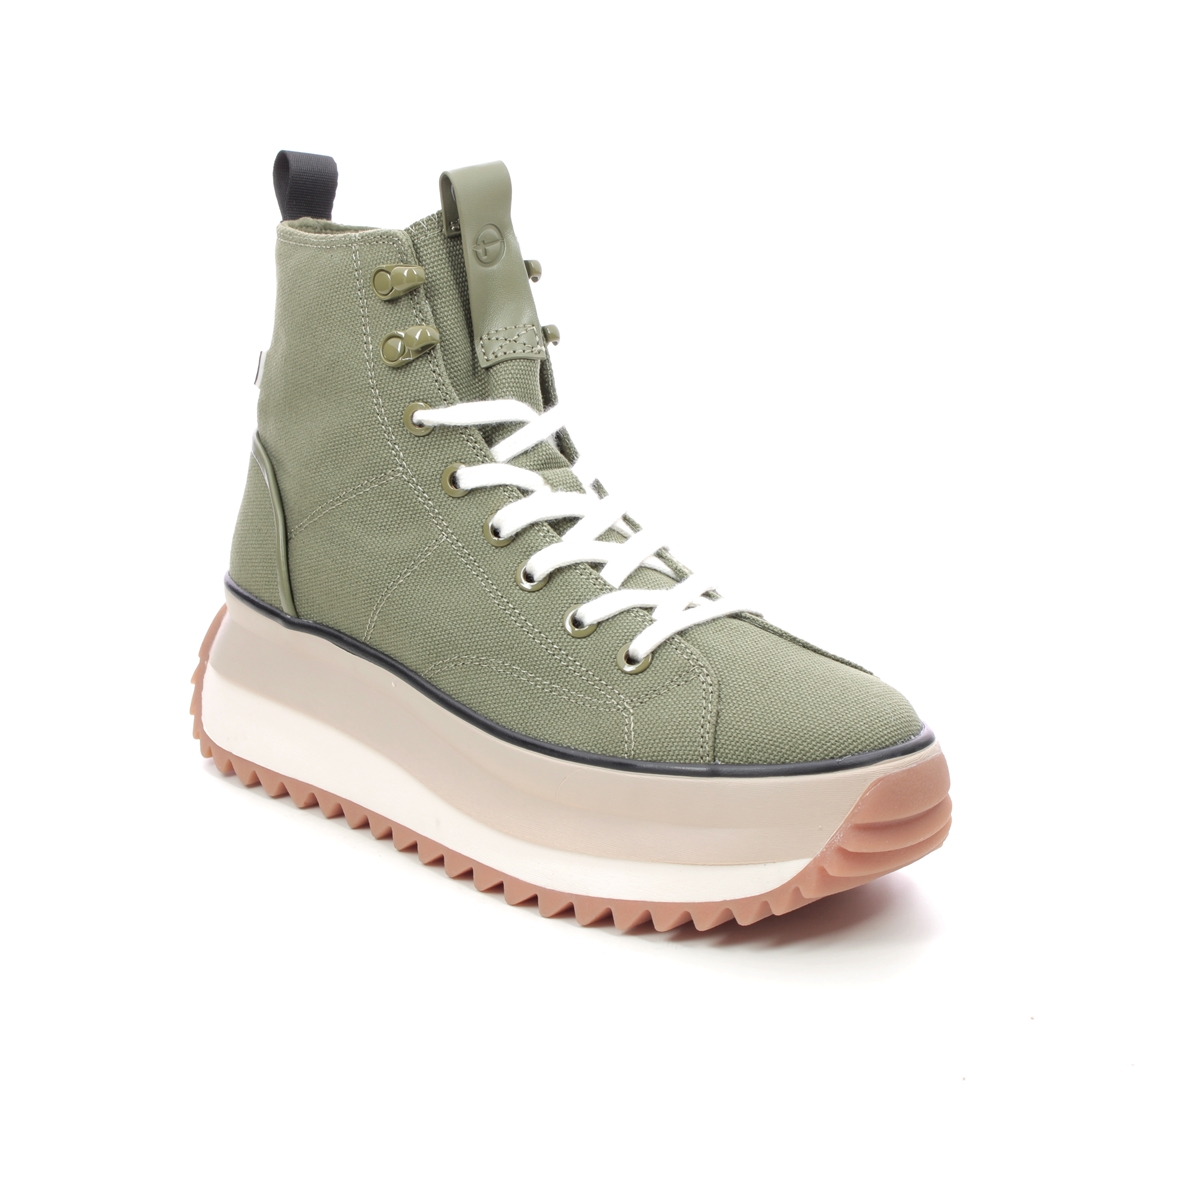 Tamaris Starry Hike Ht Olive Green Womens Hi Tops 25201-20-722 In Size 41 In Plain Olive Green